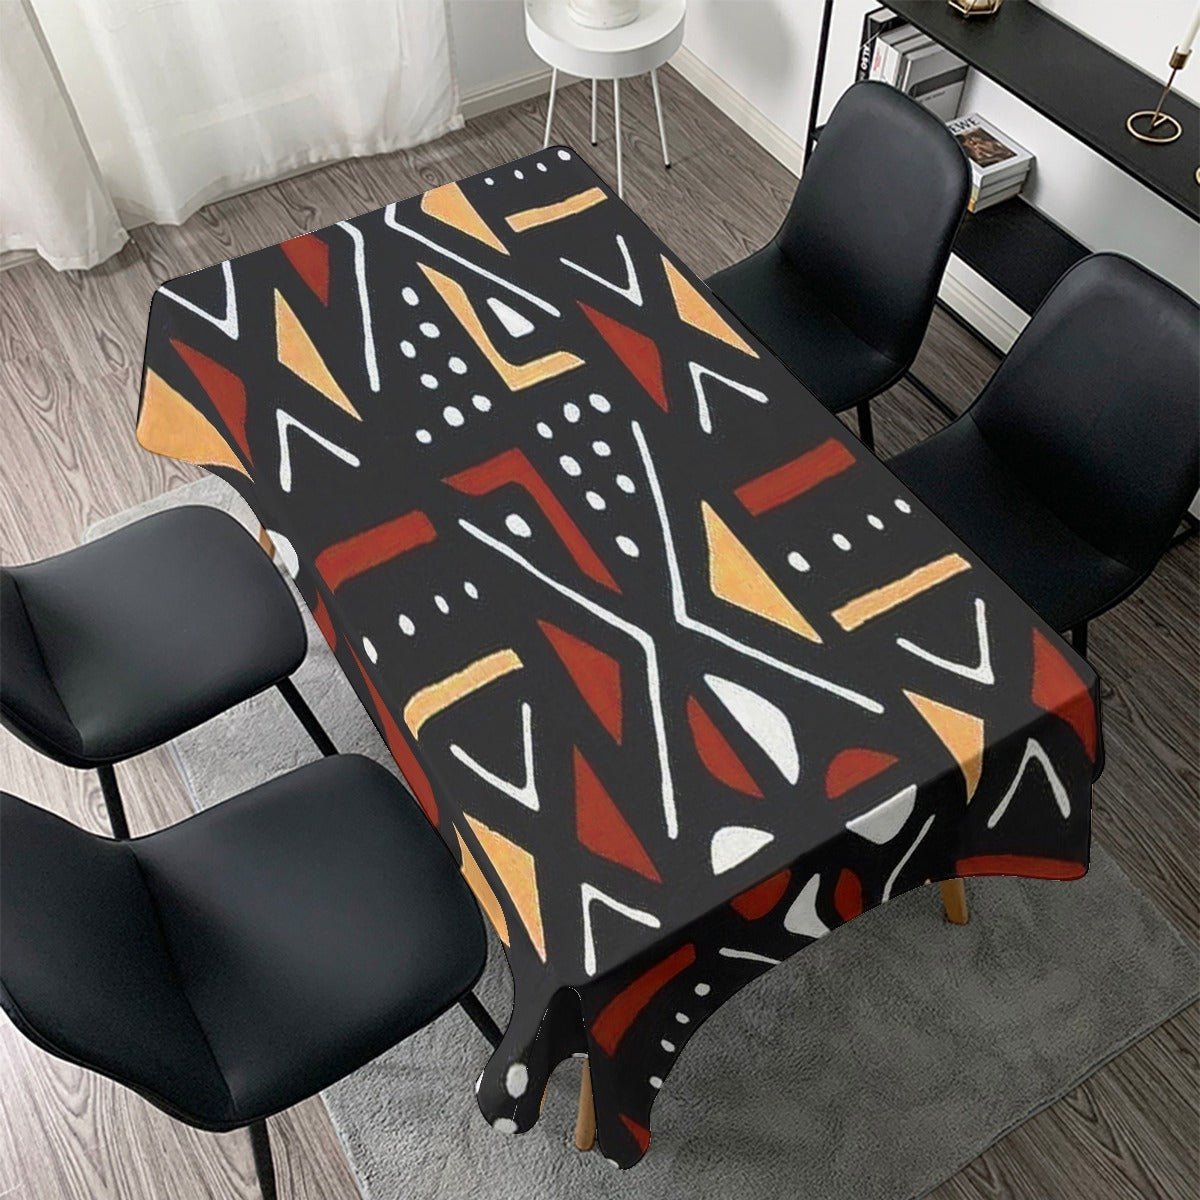 Mudcloth Tablecloth African Print - Bynelo